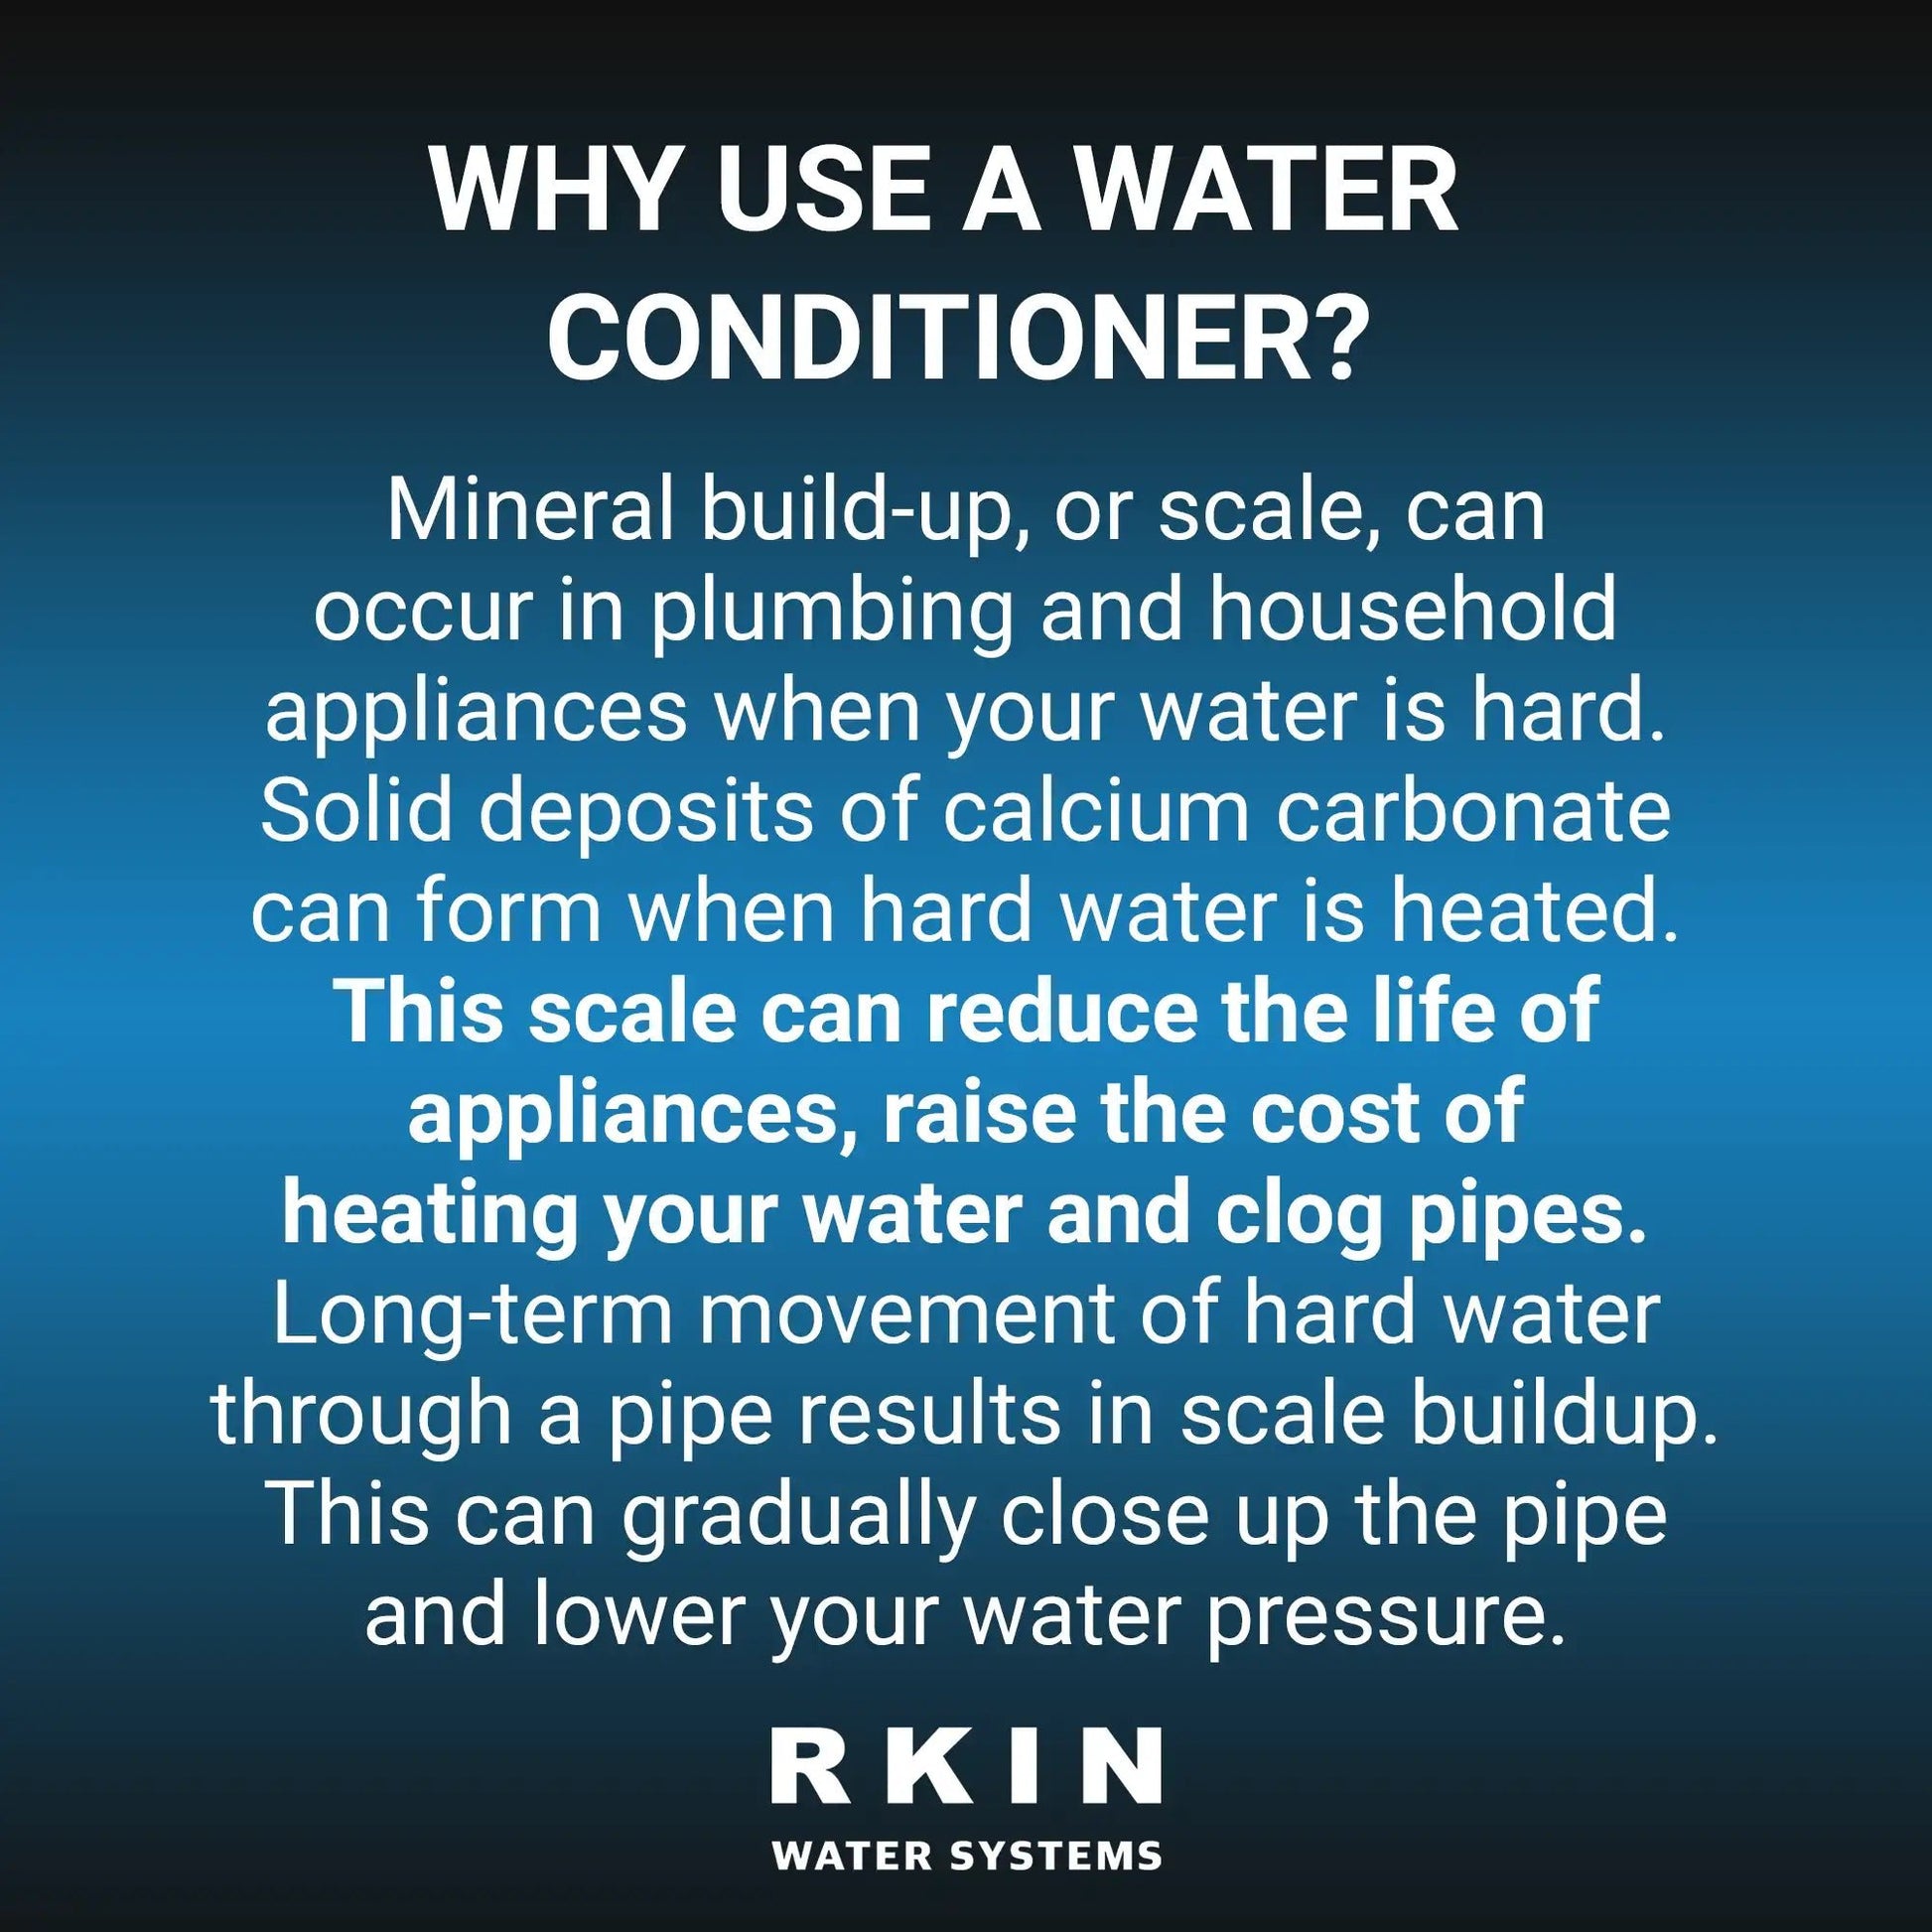 Salt Based Water Softener and Whole House Carbon Filter System - RKIN